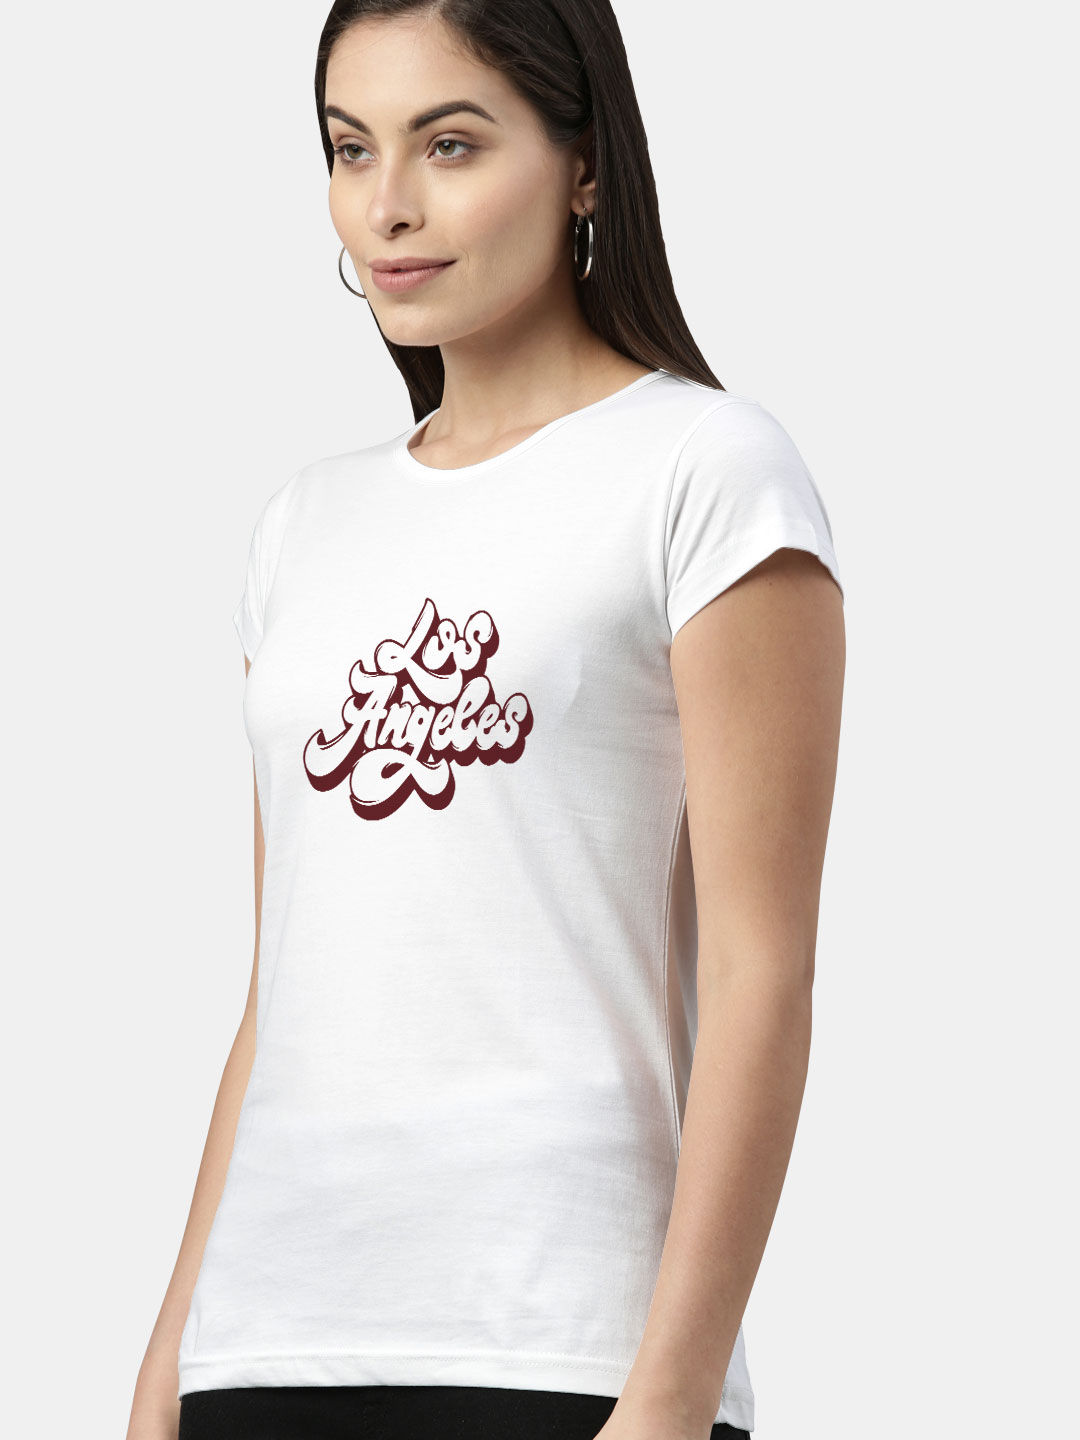 Buy Los Angeles White Tshirt for Womens T-Shirt Online at Lowest Price